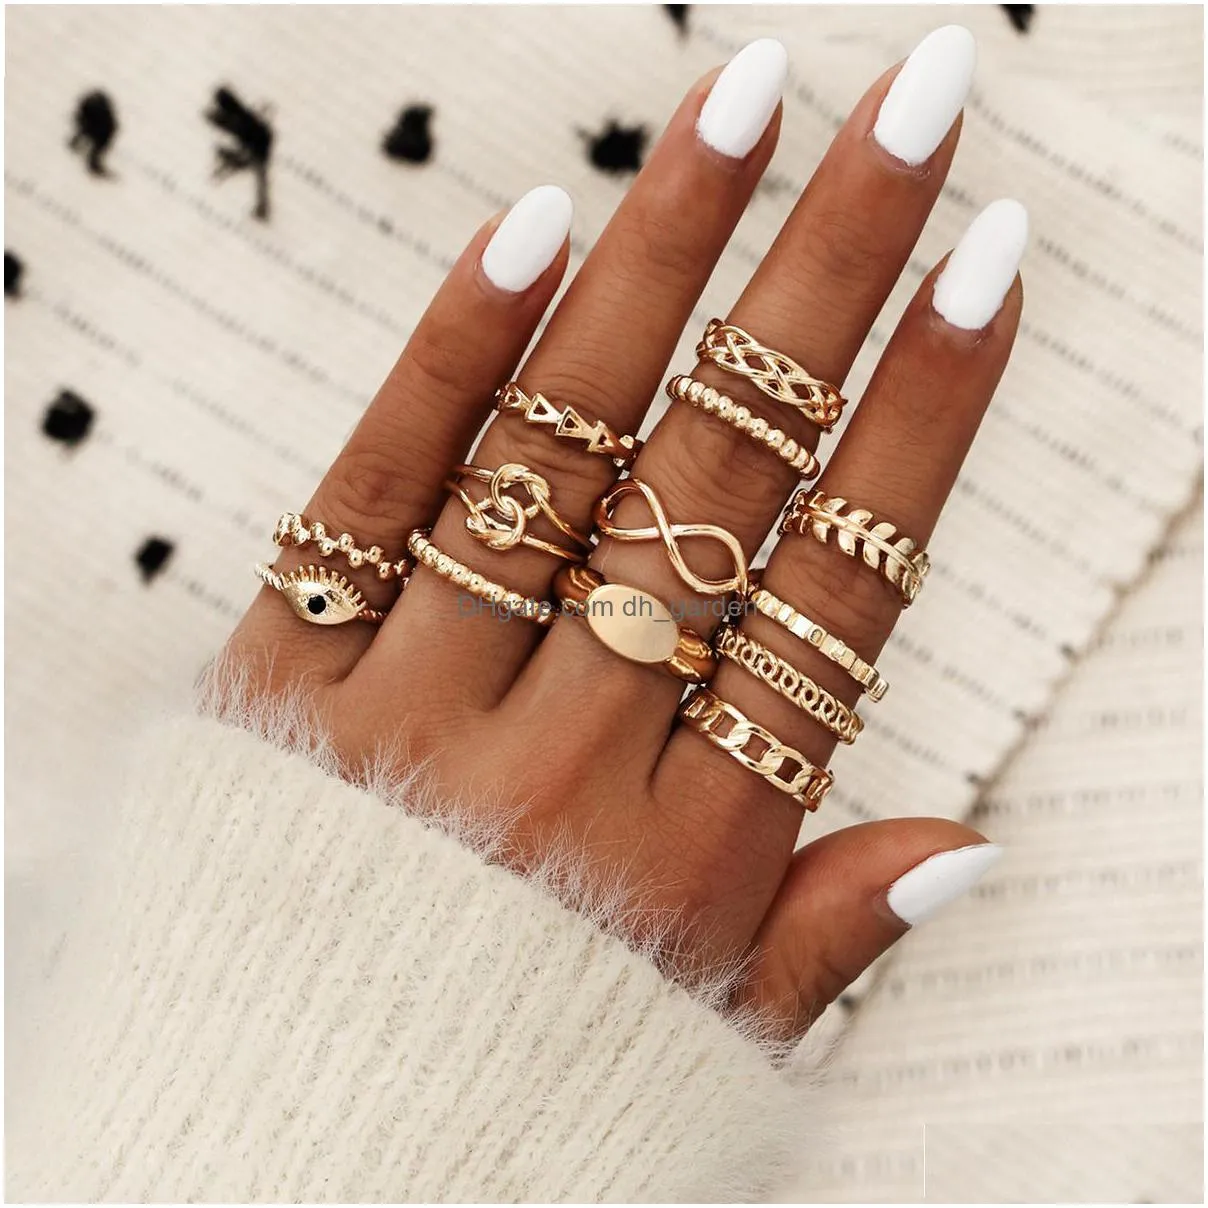 10 sets/lot vintage rings sets for women jewelry accessories heart flowers stars finger ring female jewelry gifts